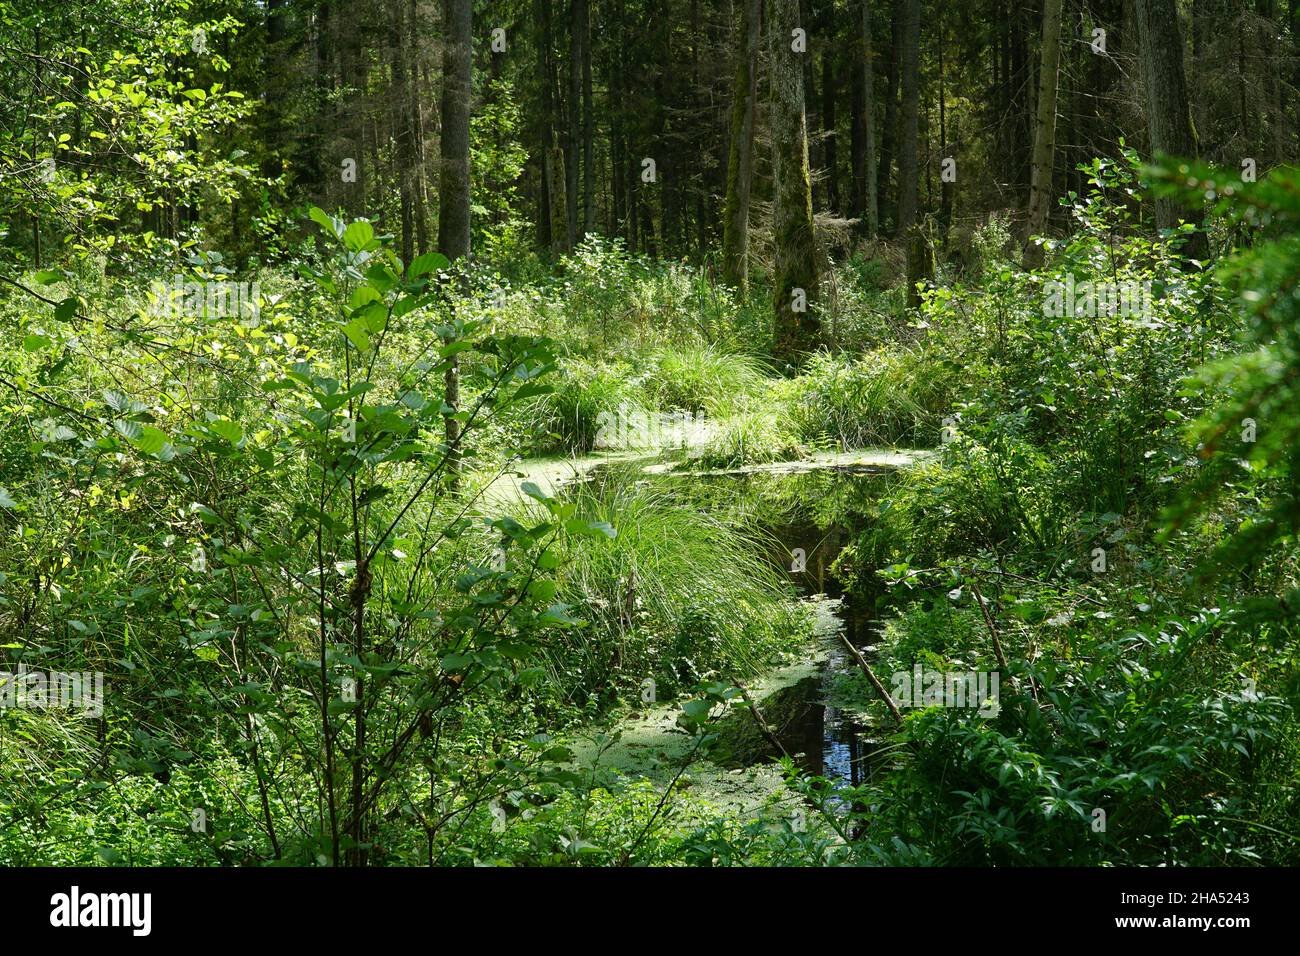 In Deep forest. Wild natural dense woods natural background. Knyszyn Forest, Poland, Europe. Stock Photo